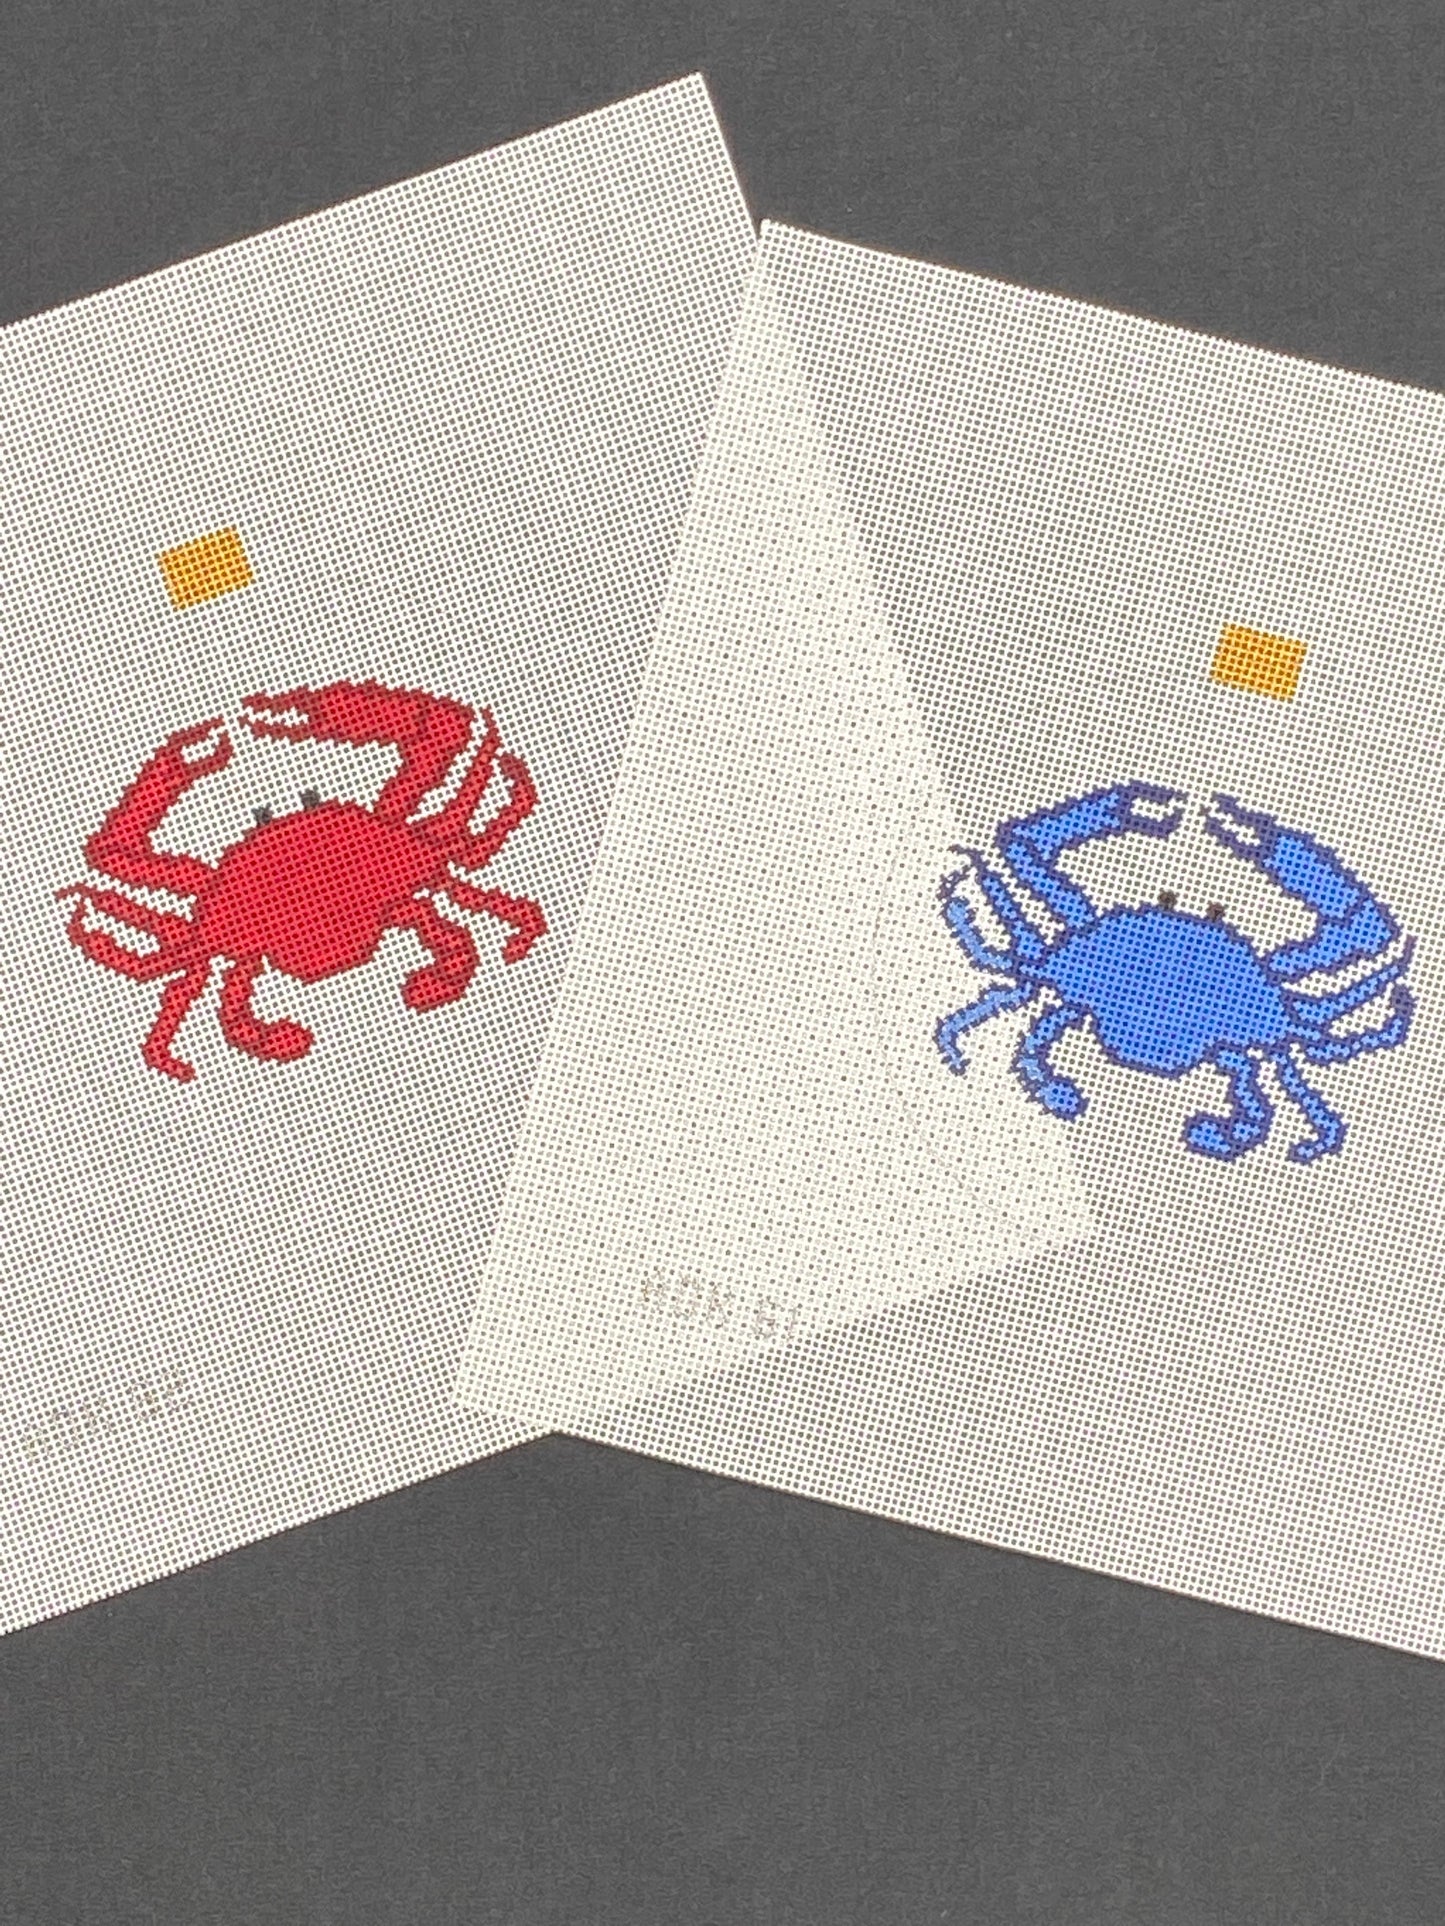 SALE "SECOND" Red Crab Ornament